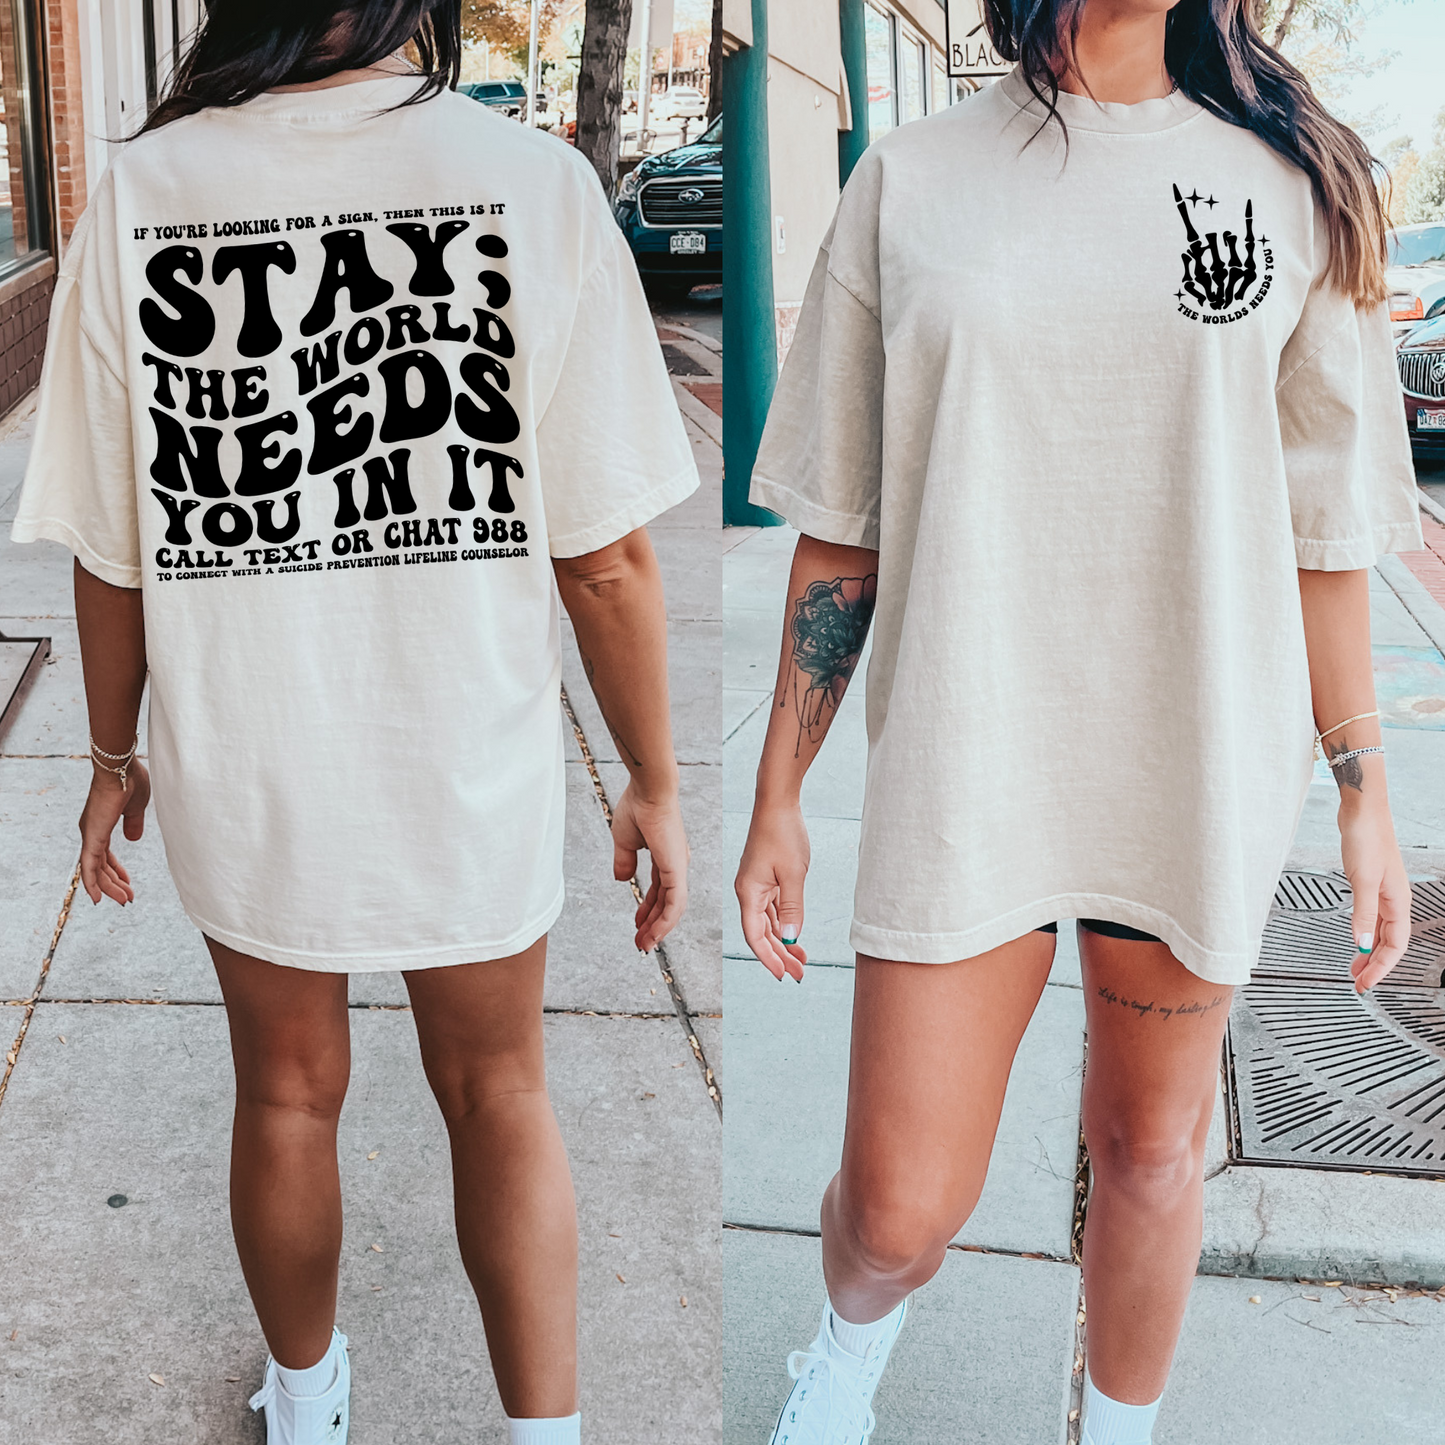 Stay the world needs you in it tee